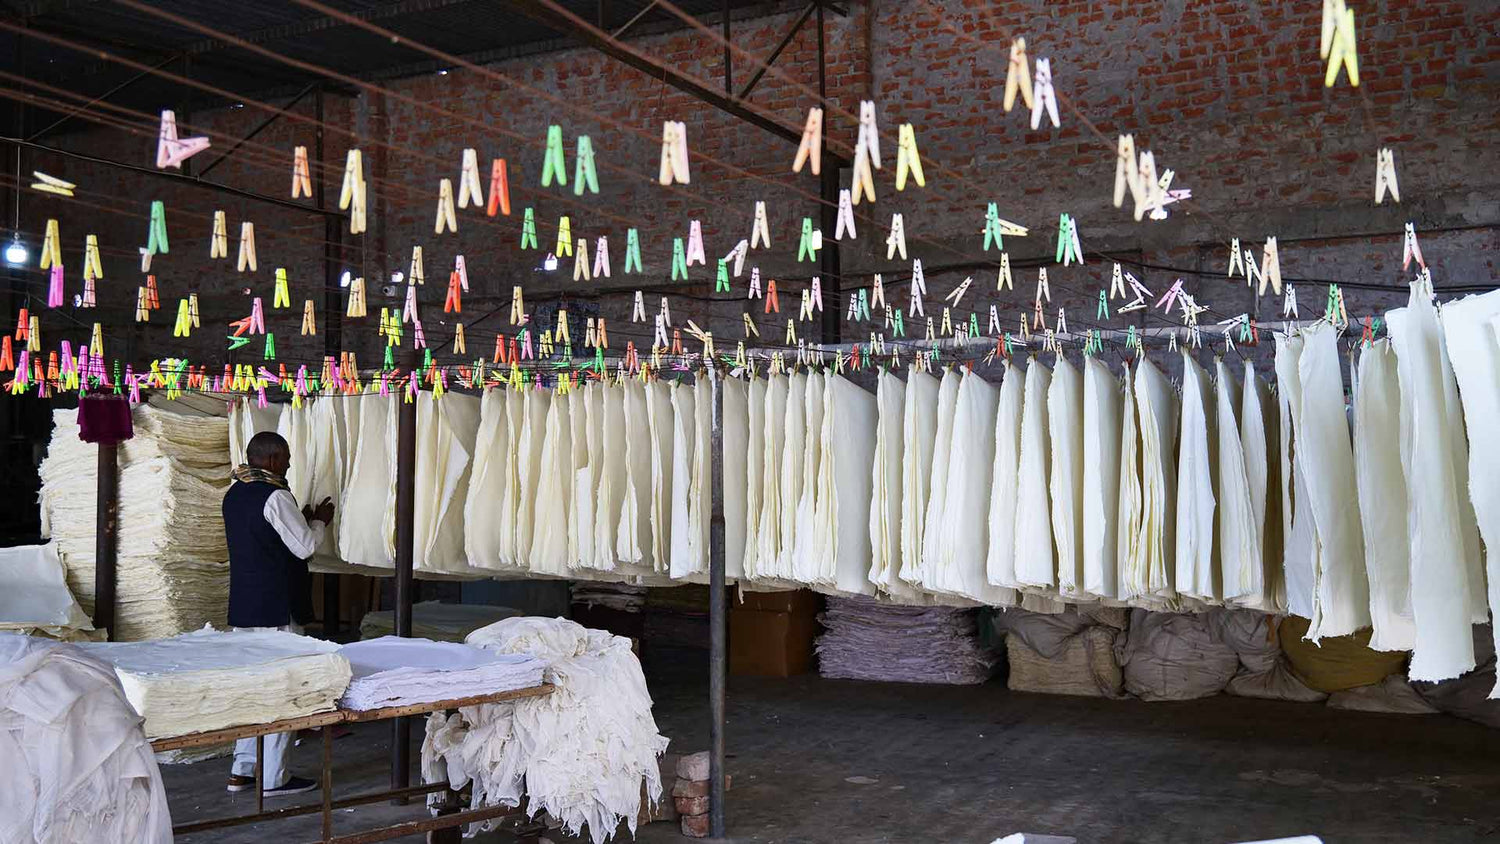 Many sheets of handmade paper held by multi coloured plastic pegs on clothes lines inside a factory.